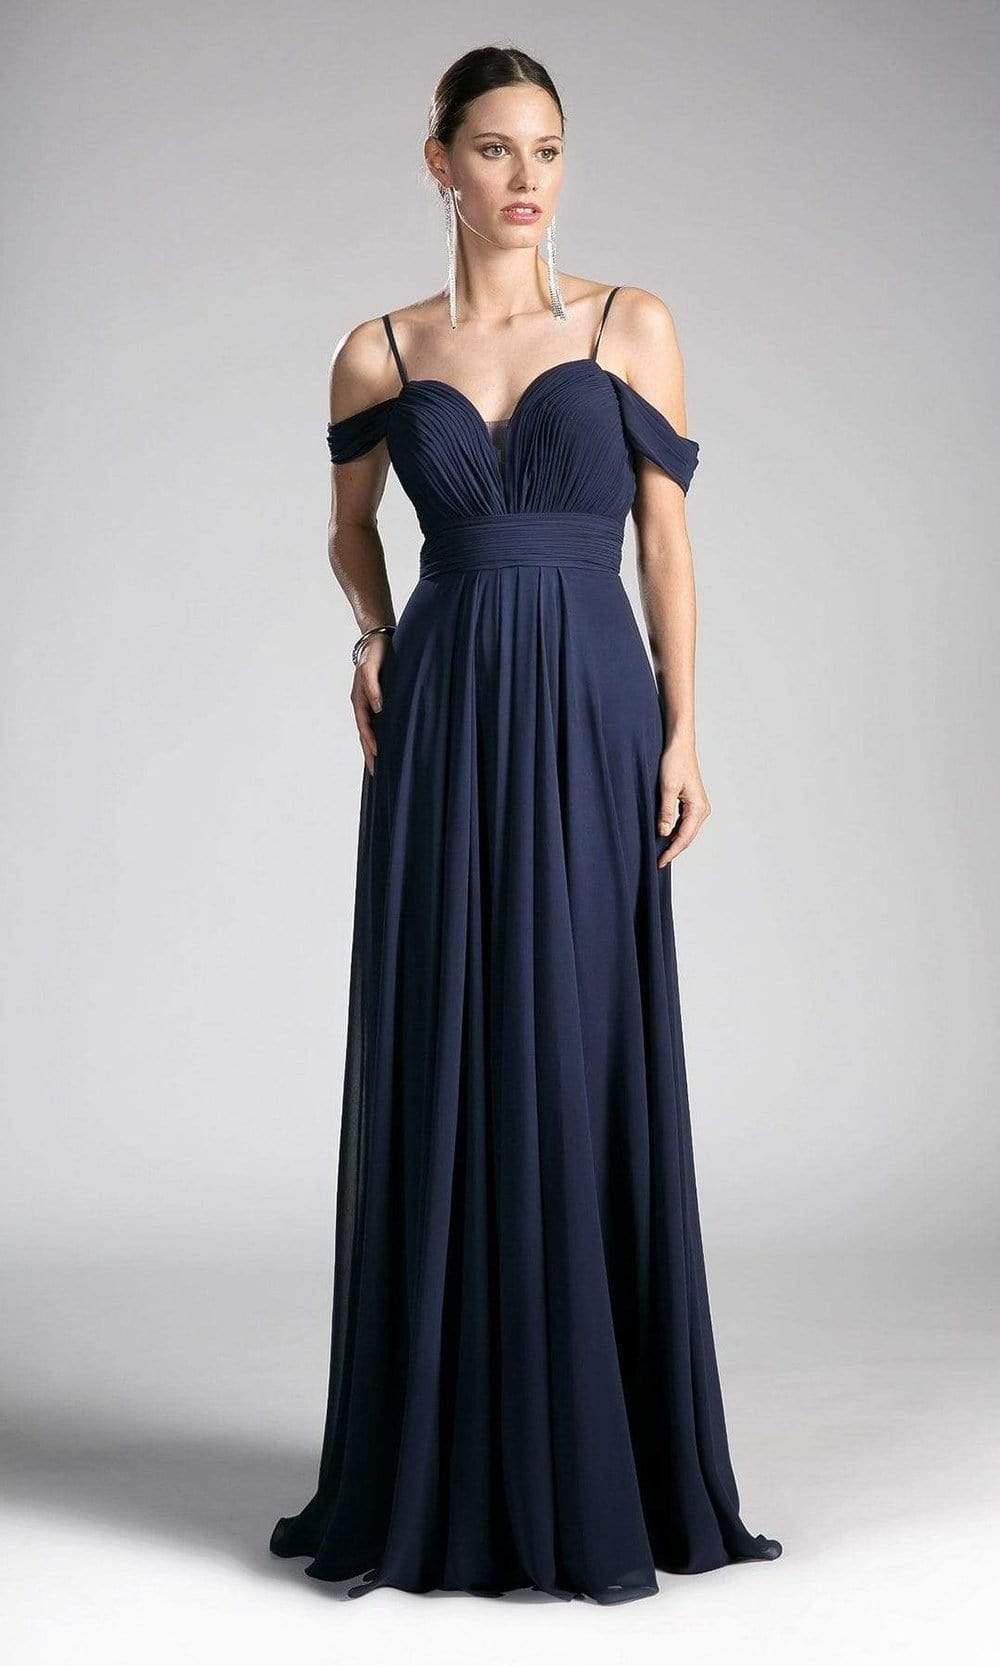 Cinderella Divine - Shirred Plunging Sweetheart Cold Shoulder Chiffon Gown
